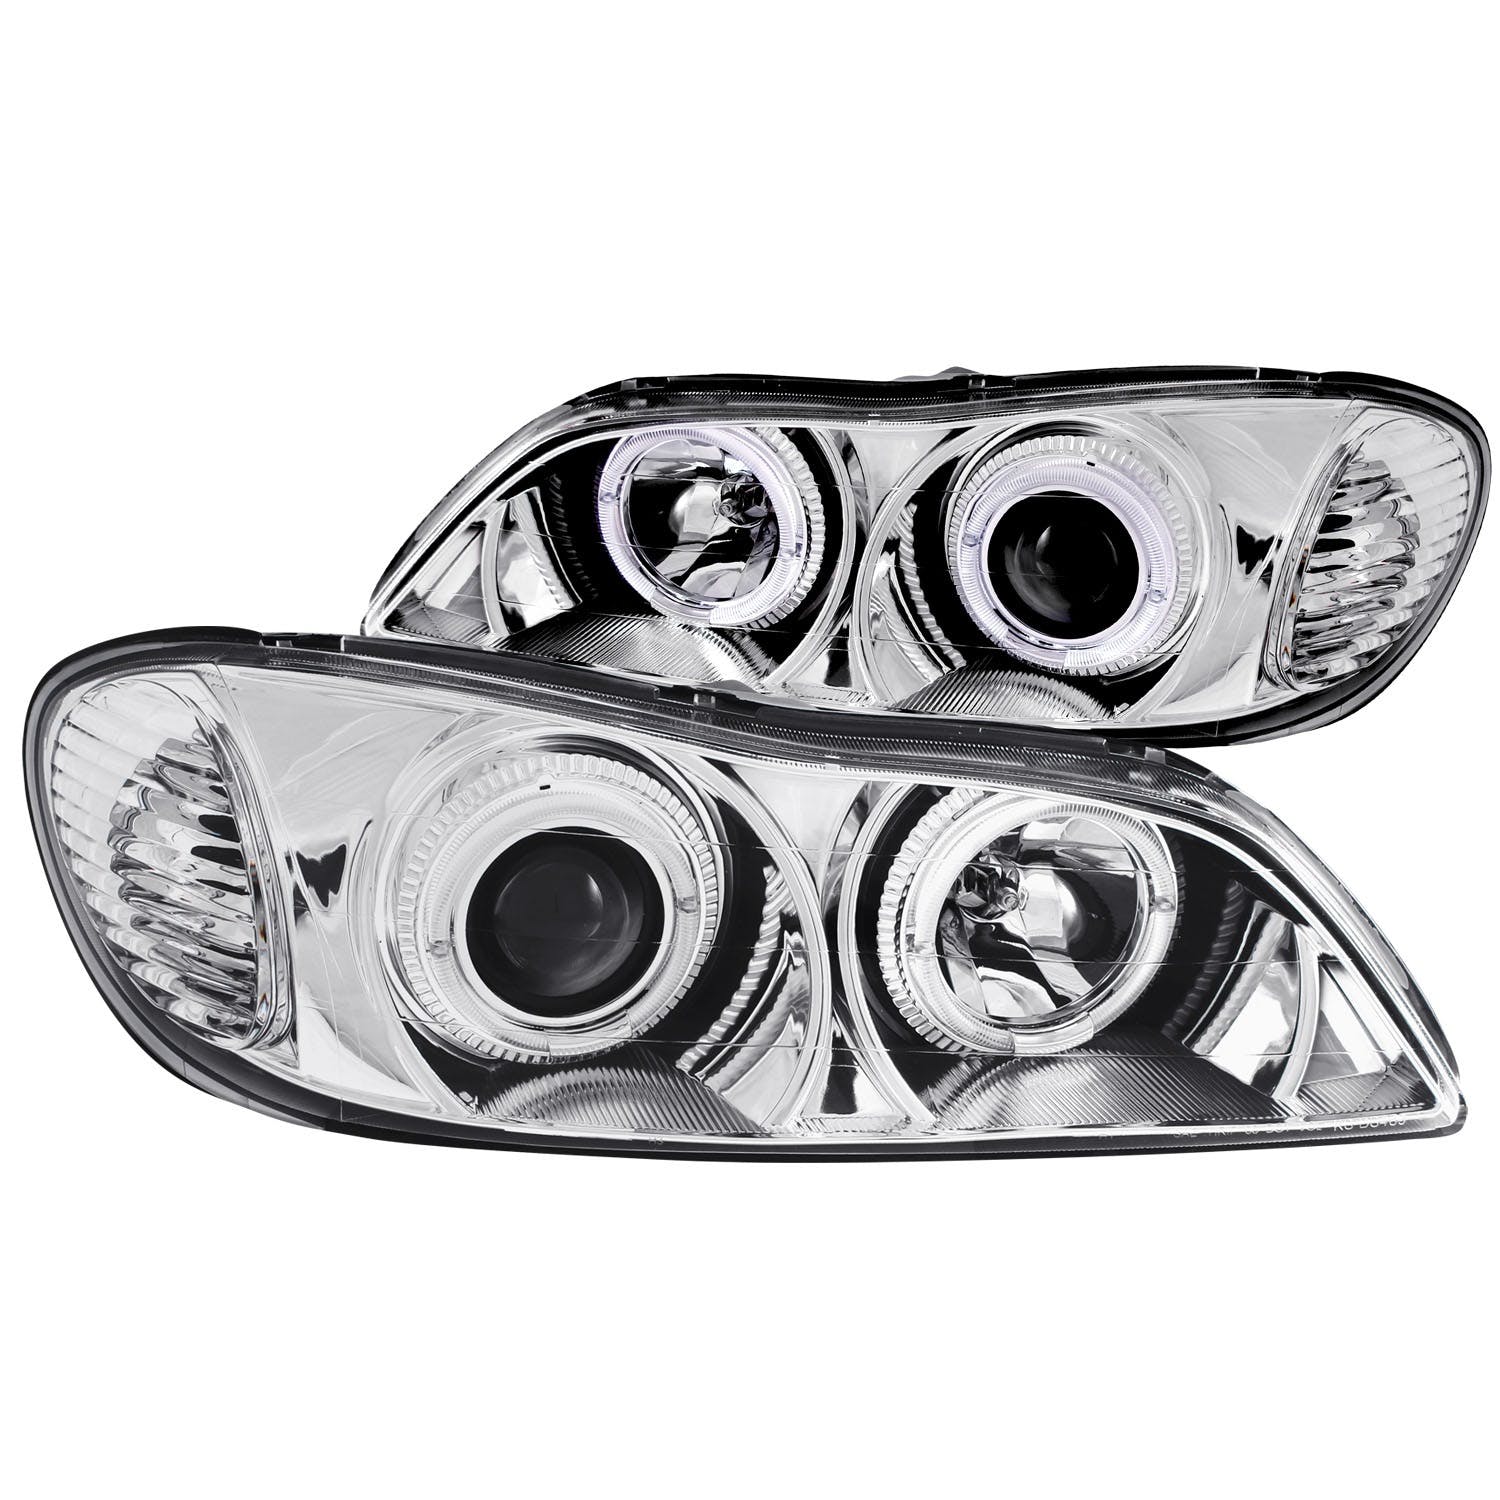 AnzoUSA 121078 Projector Headlights with Halo Chrome